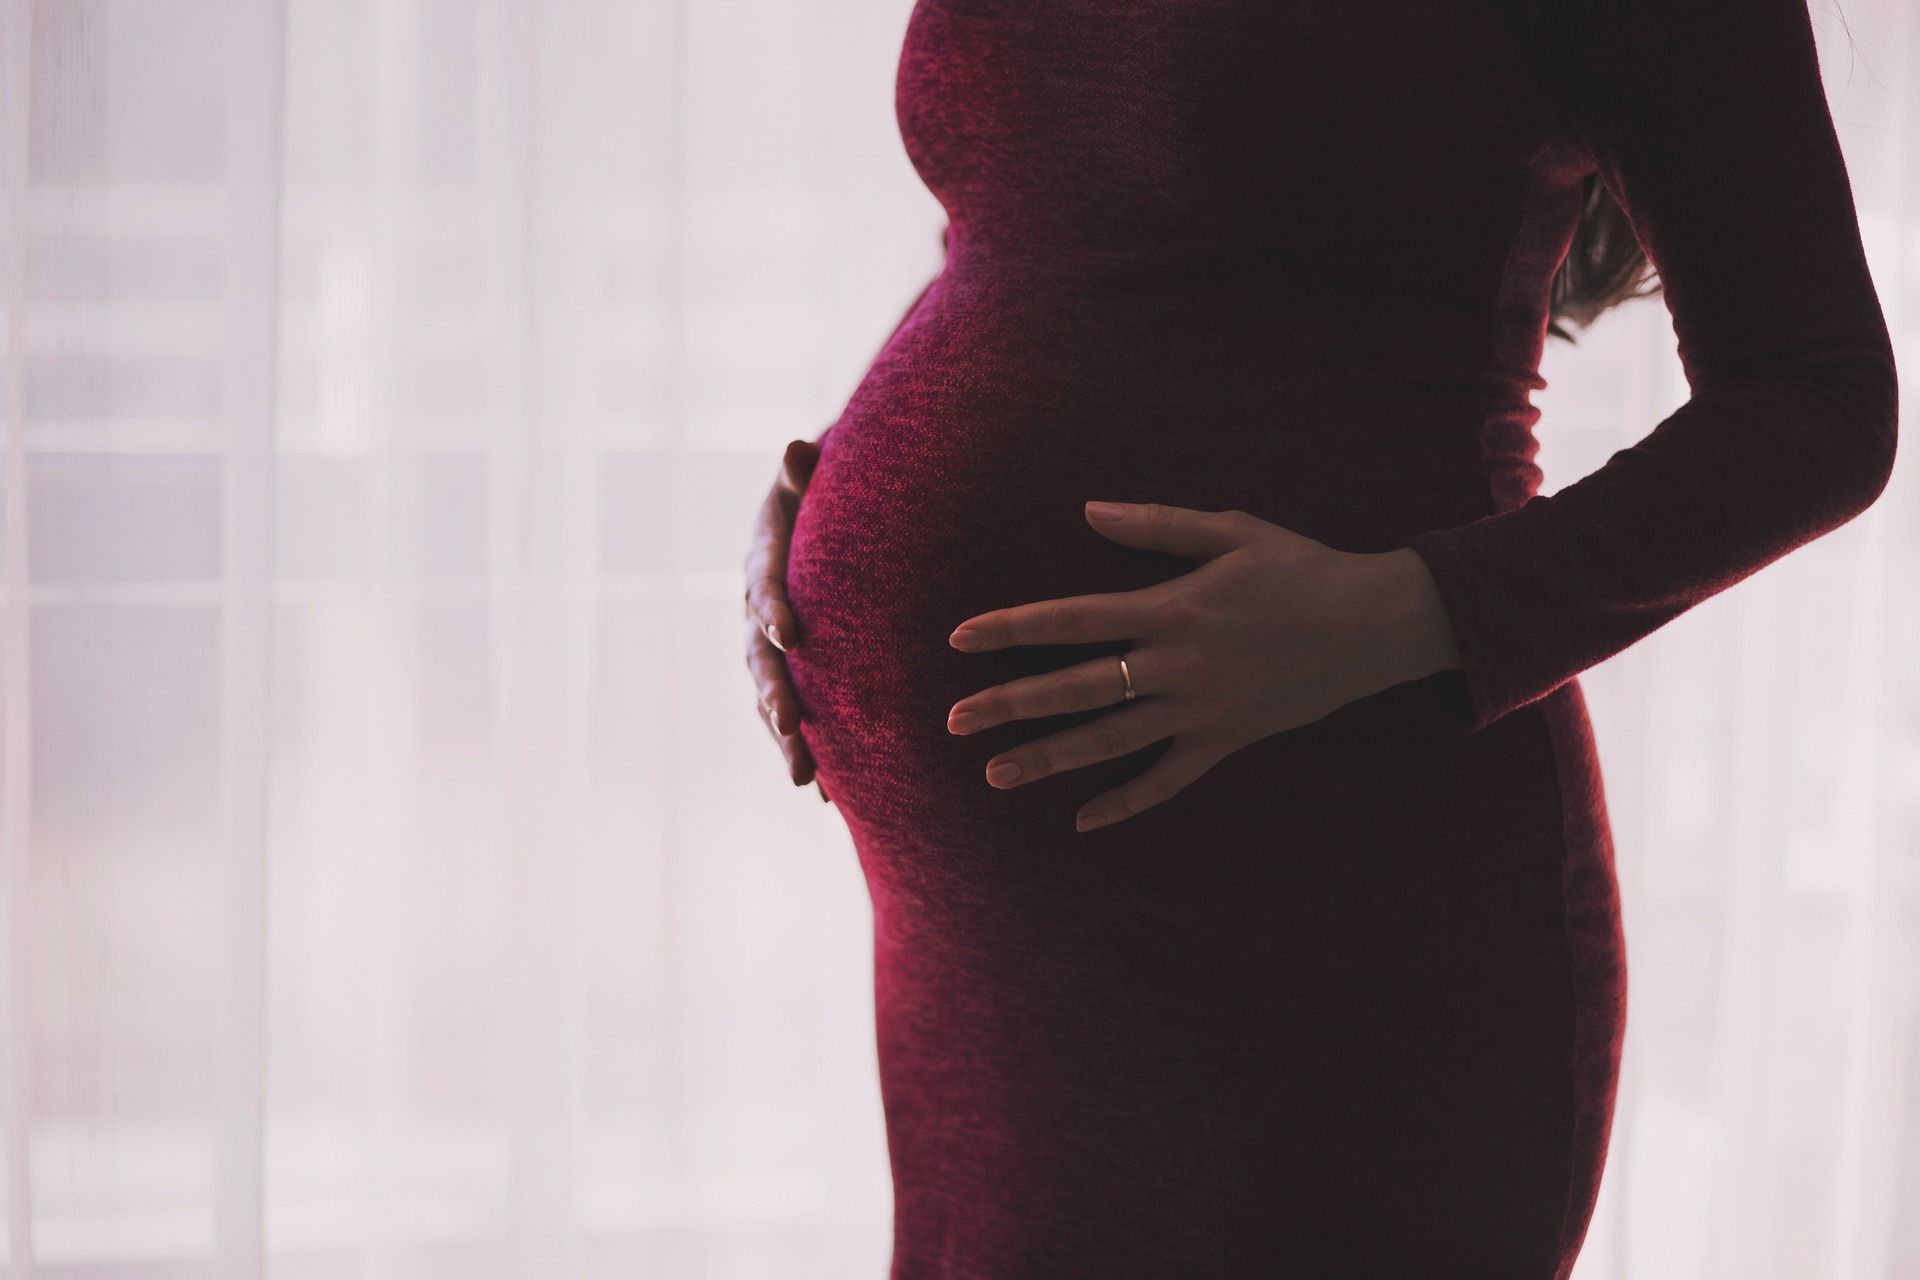 Pregnancy Complications Can Increase Mother’s Risk Of Death For Decades After Delivery: Study